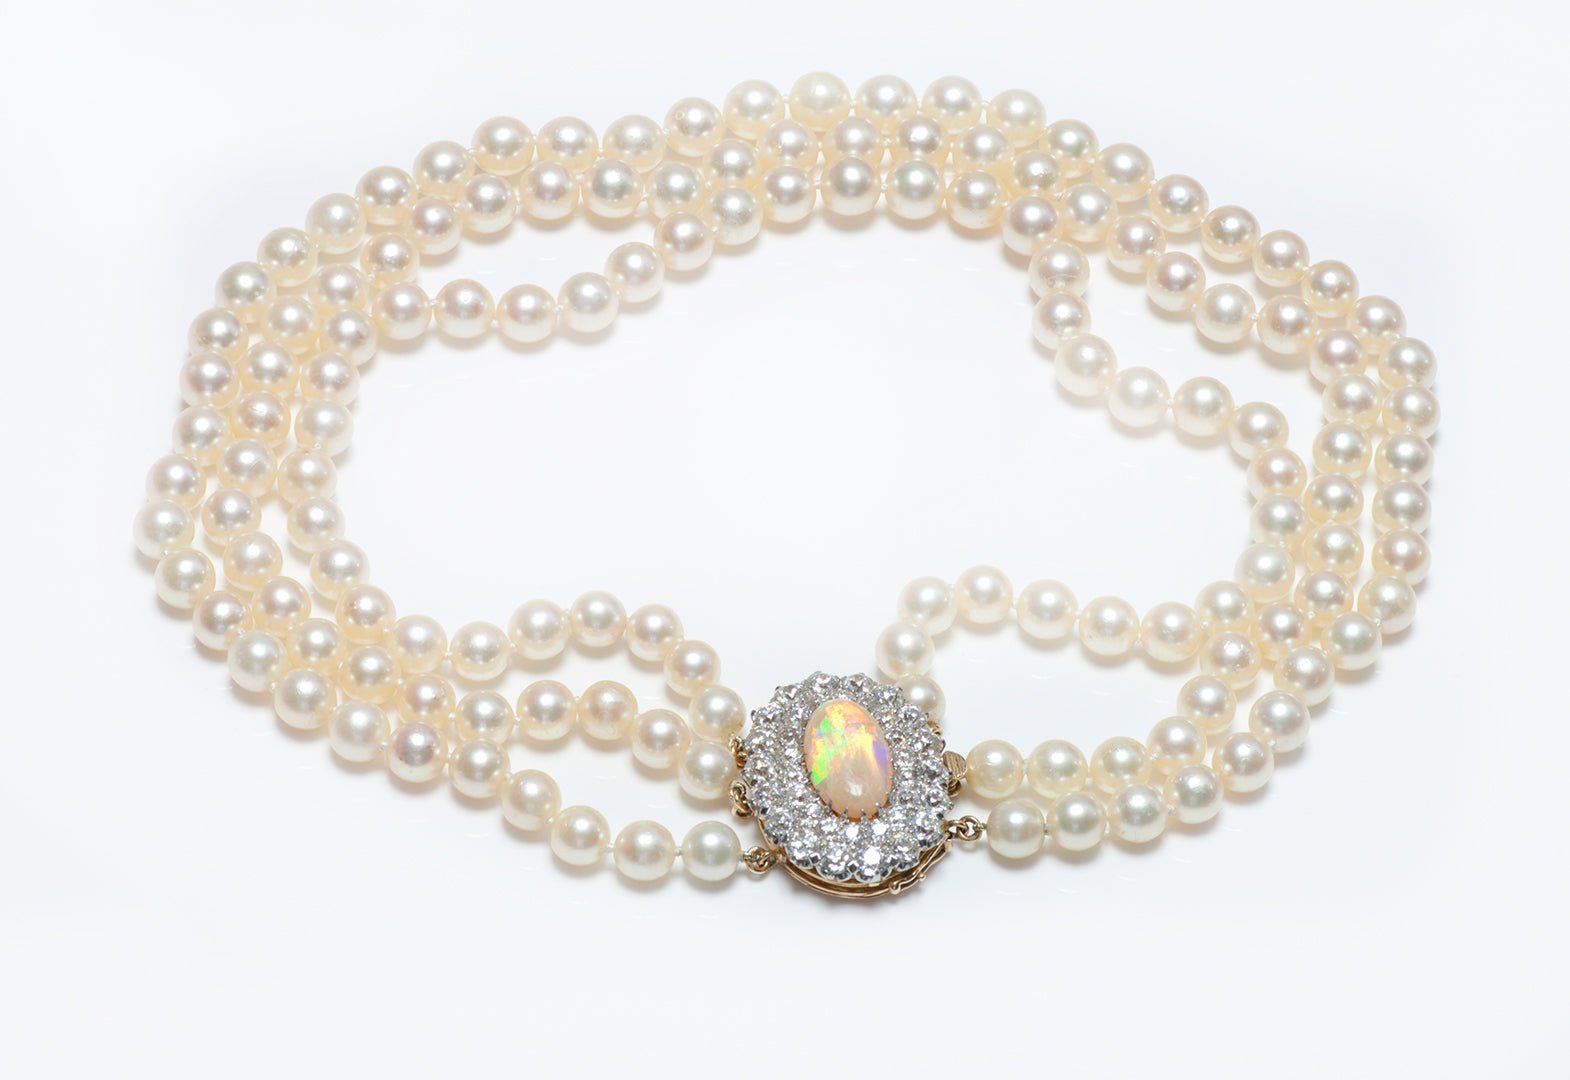 Antique Opal Diamond Pearl Necklace - DSF Antique Jewelry